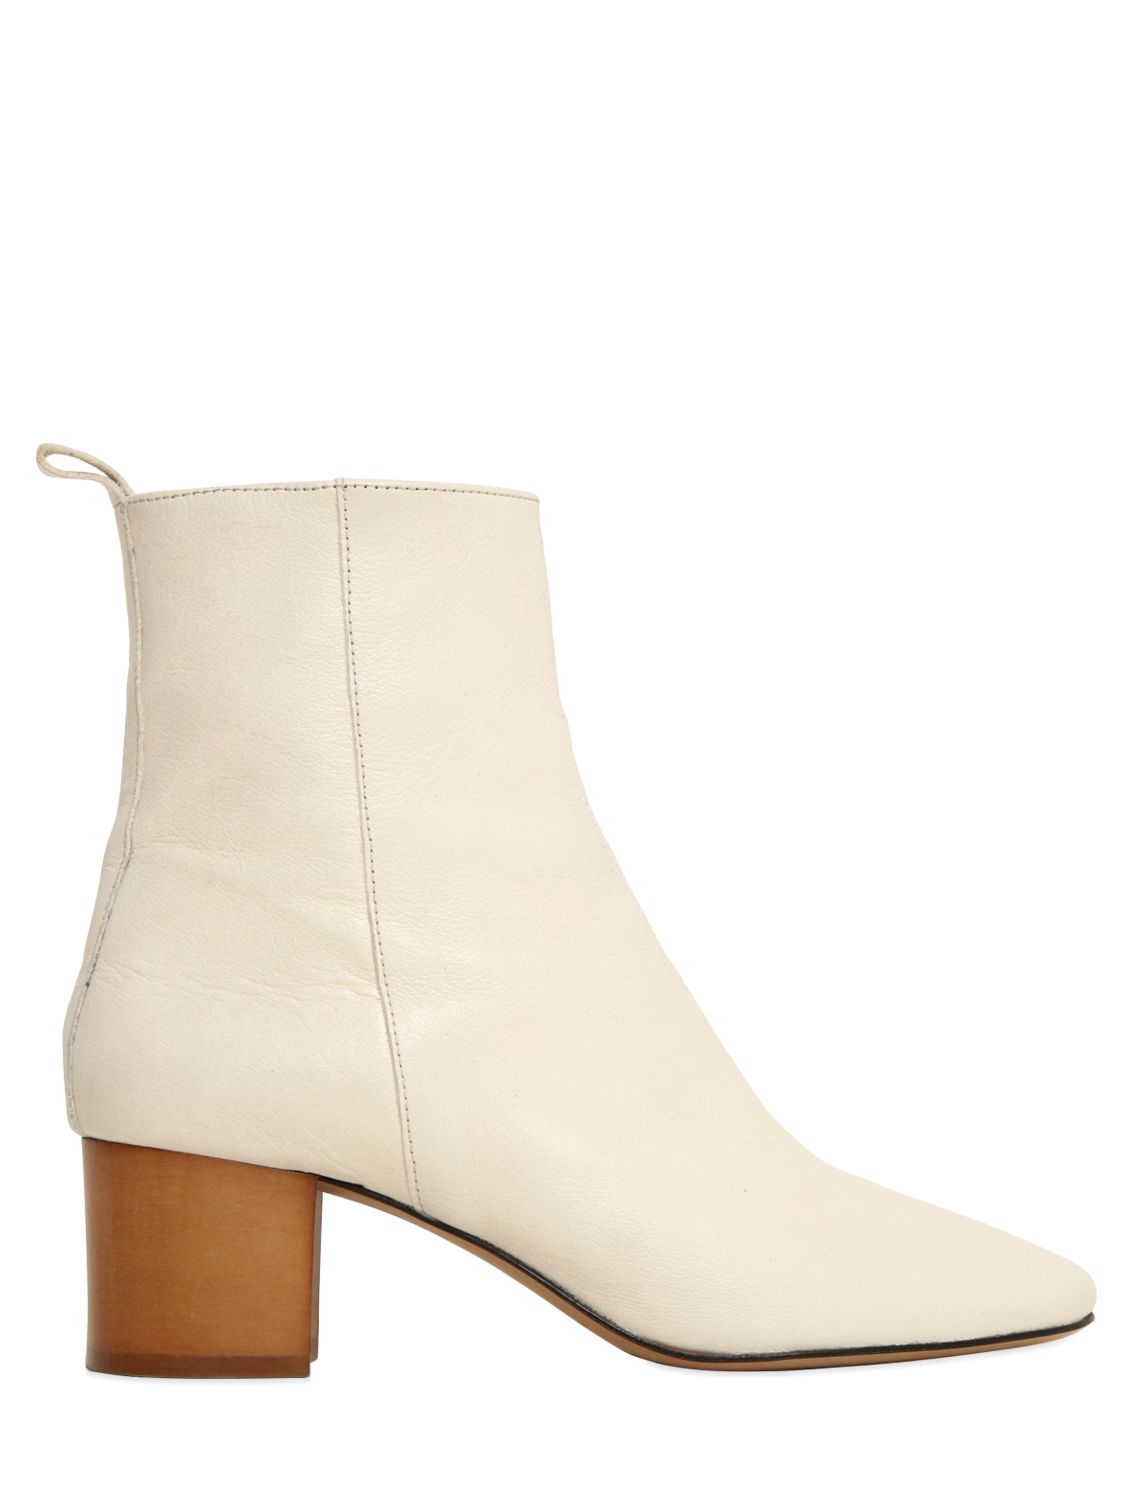 Isabel Marant Etoile 50mm Deyis Leather & Wood Boots in White - Lyst